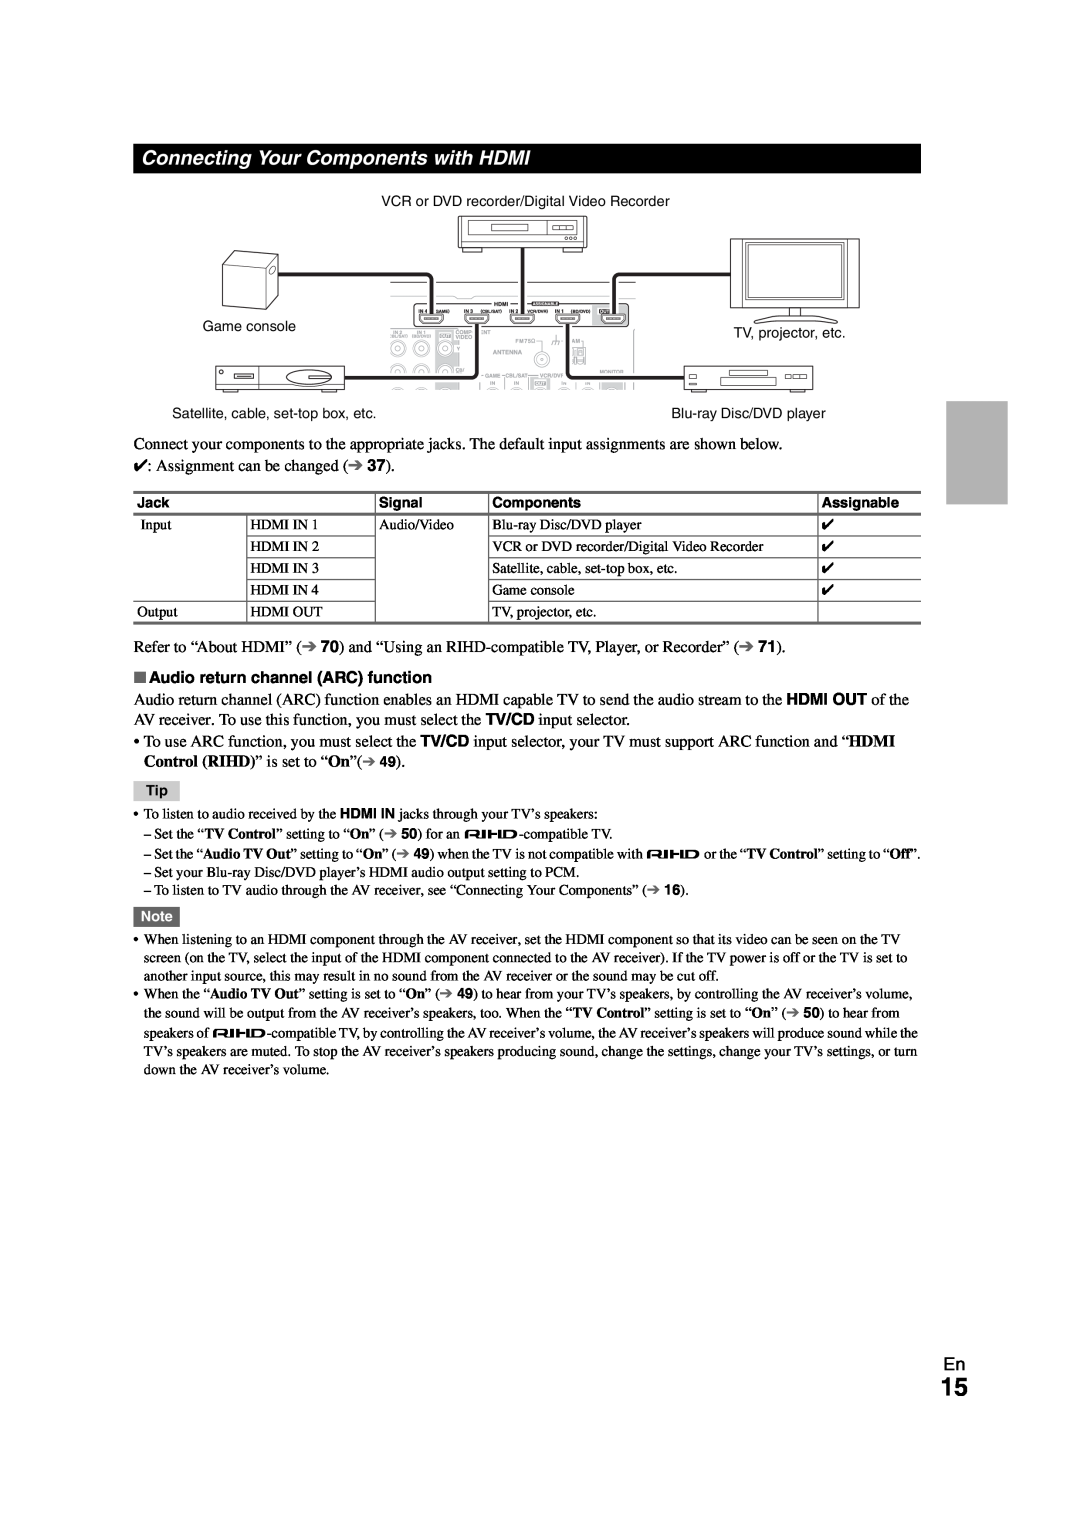 Onkyo HT-R980 instruction manual Connecting Your Components with HDMI, Audio return channel ARC function 